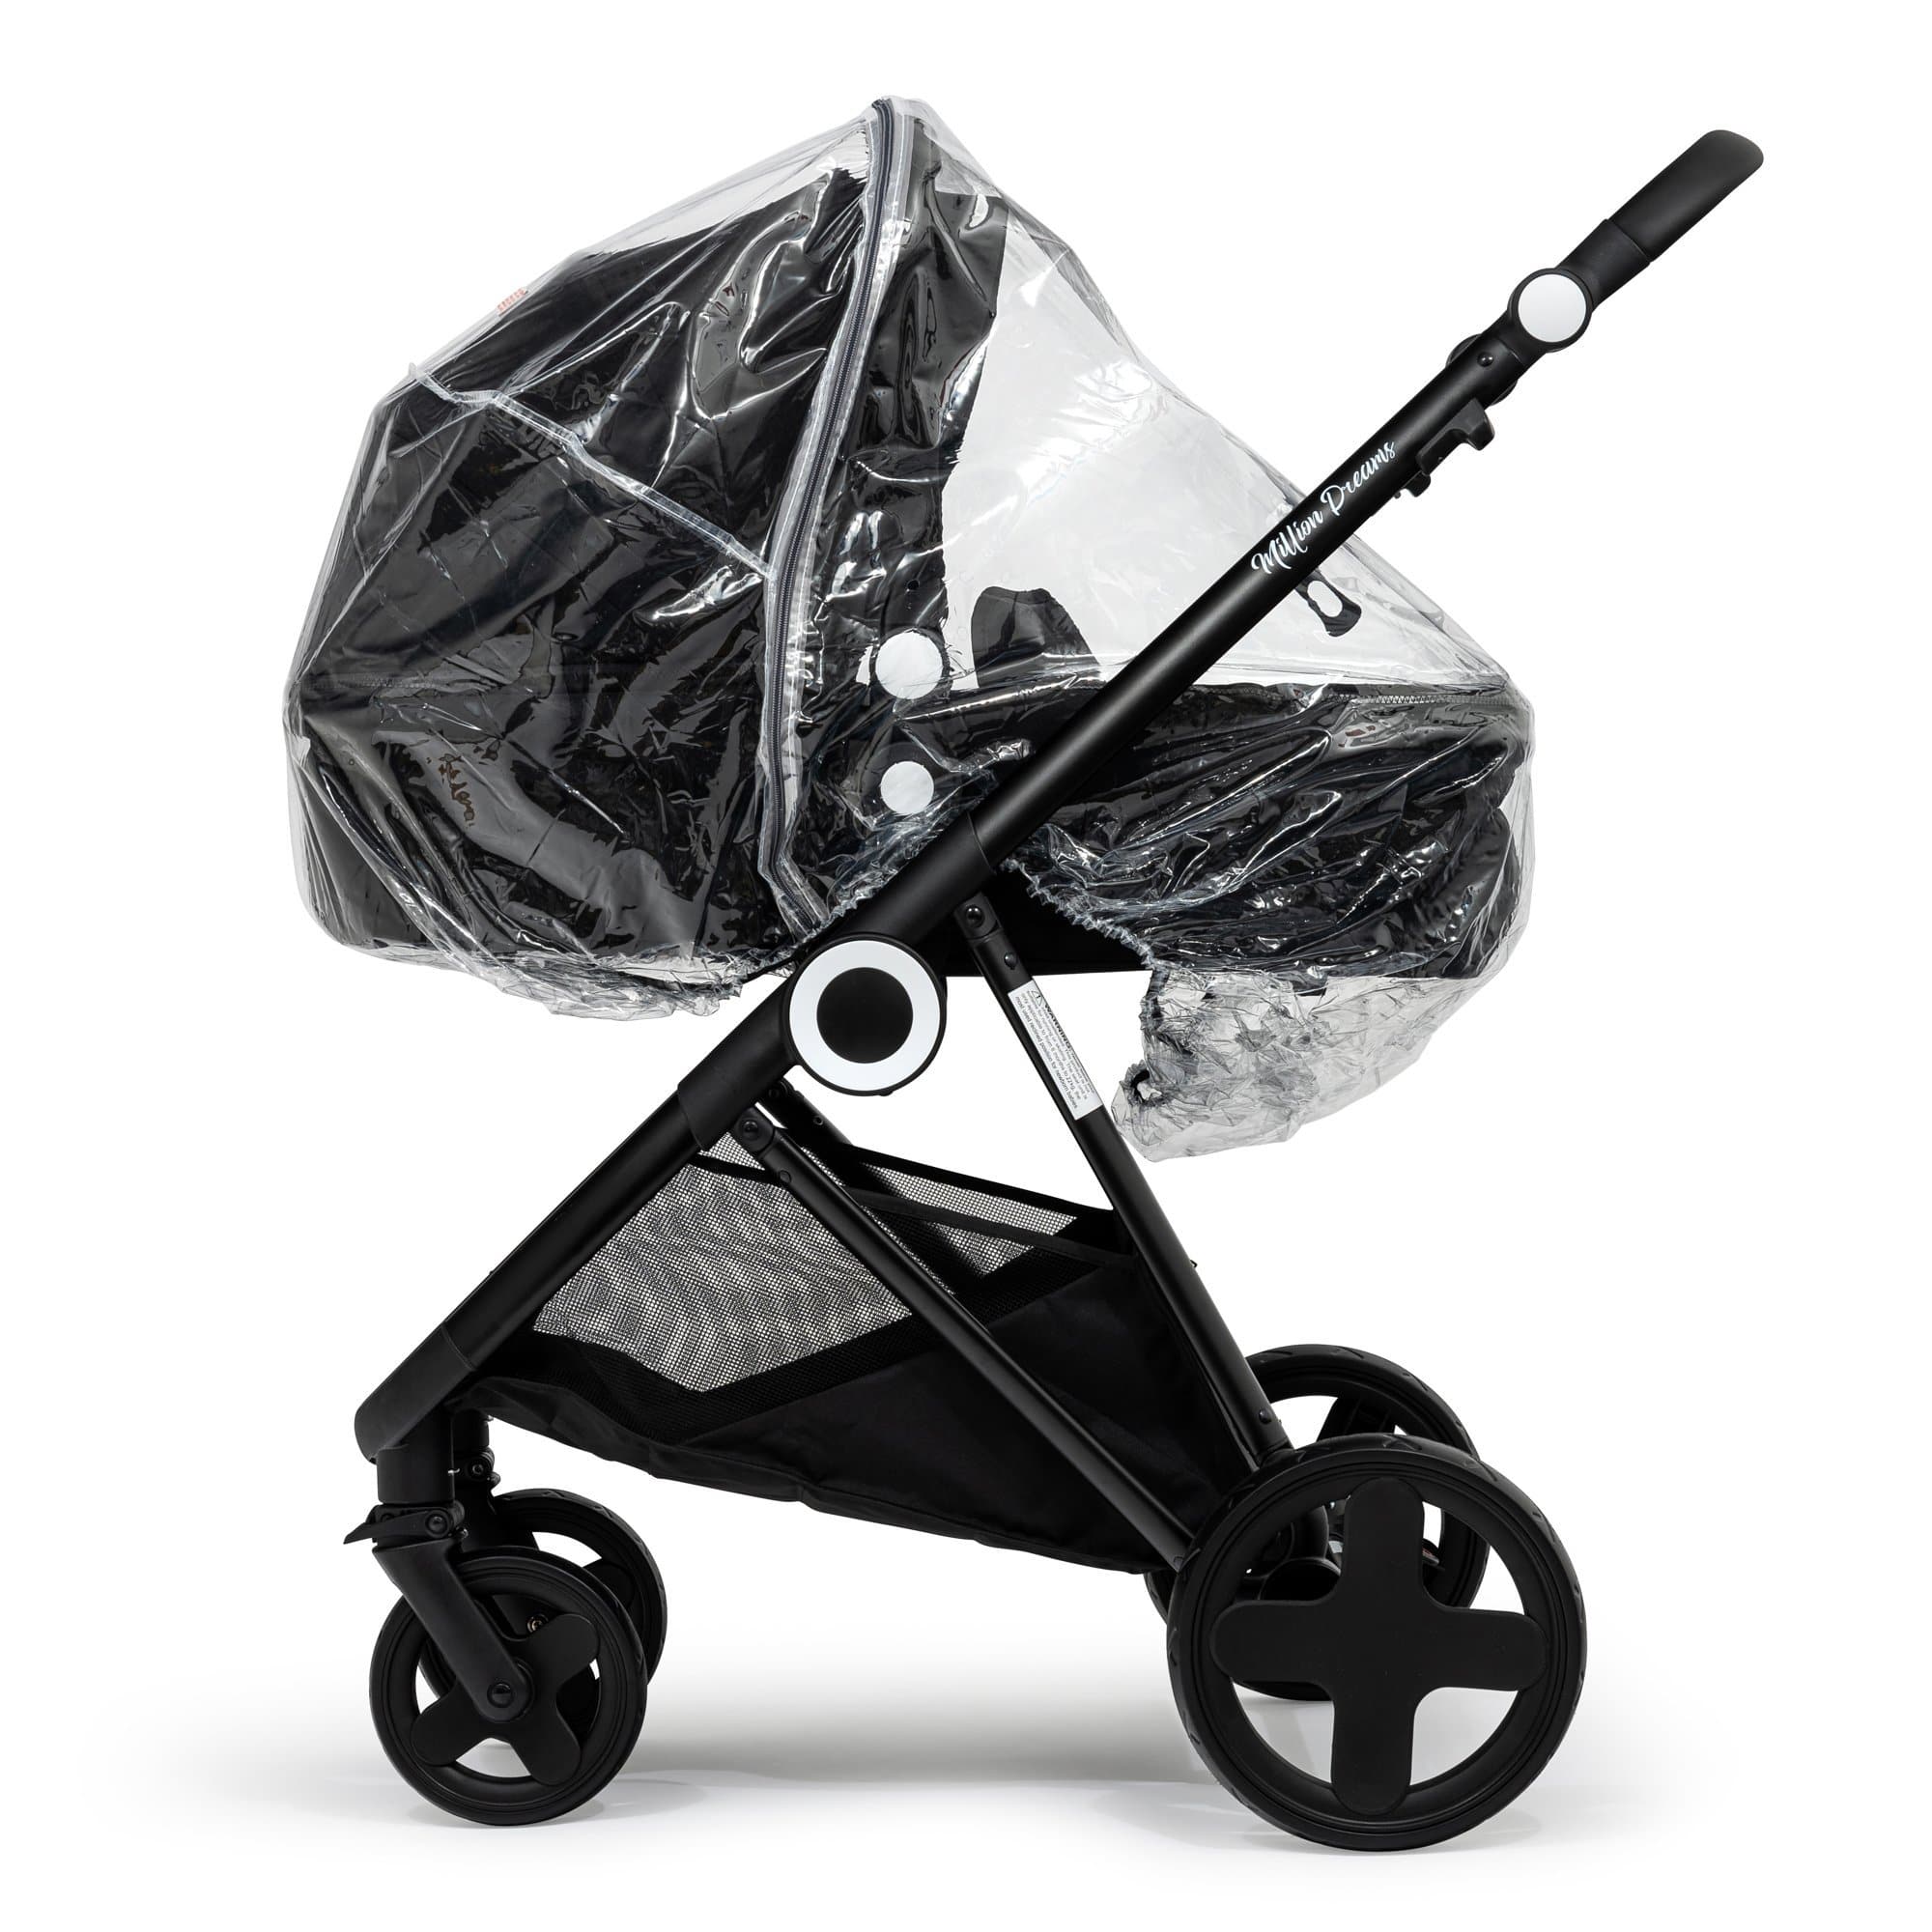 2 in 1 Rain Cover Compatible with iCandy - Fits All Models - For Your Little One